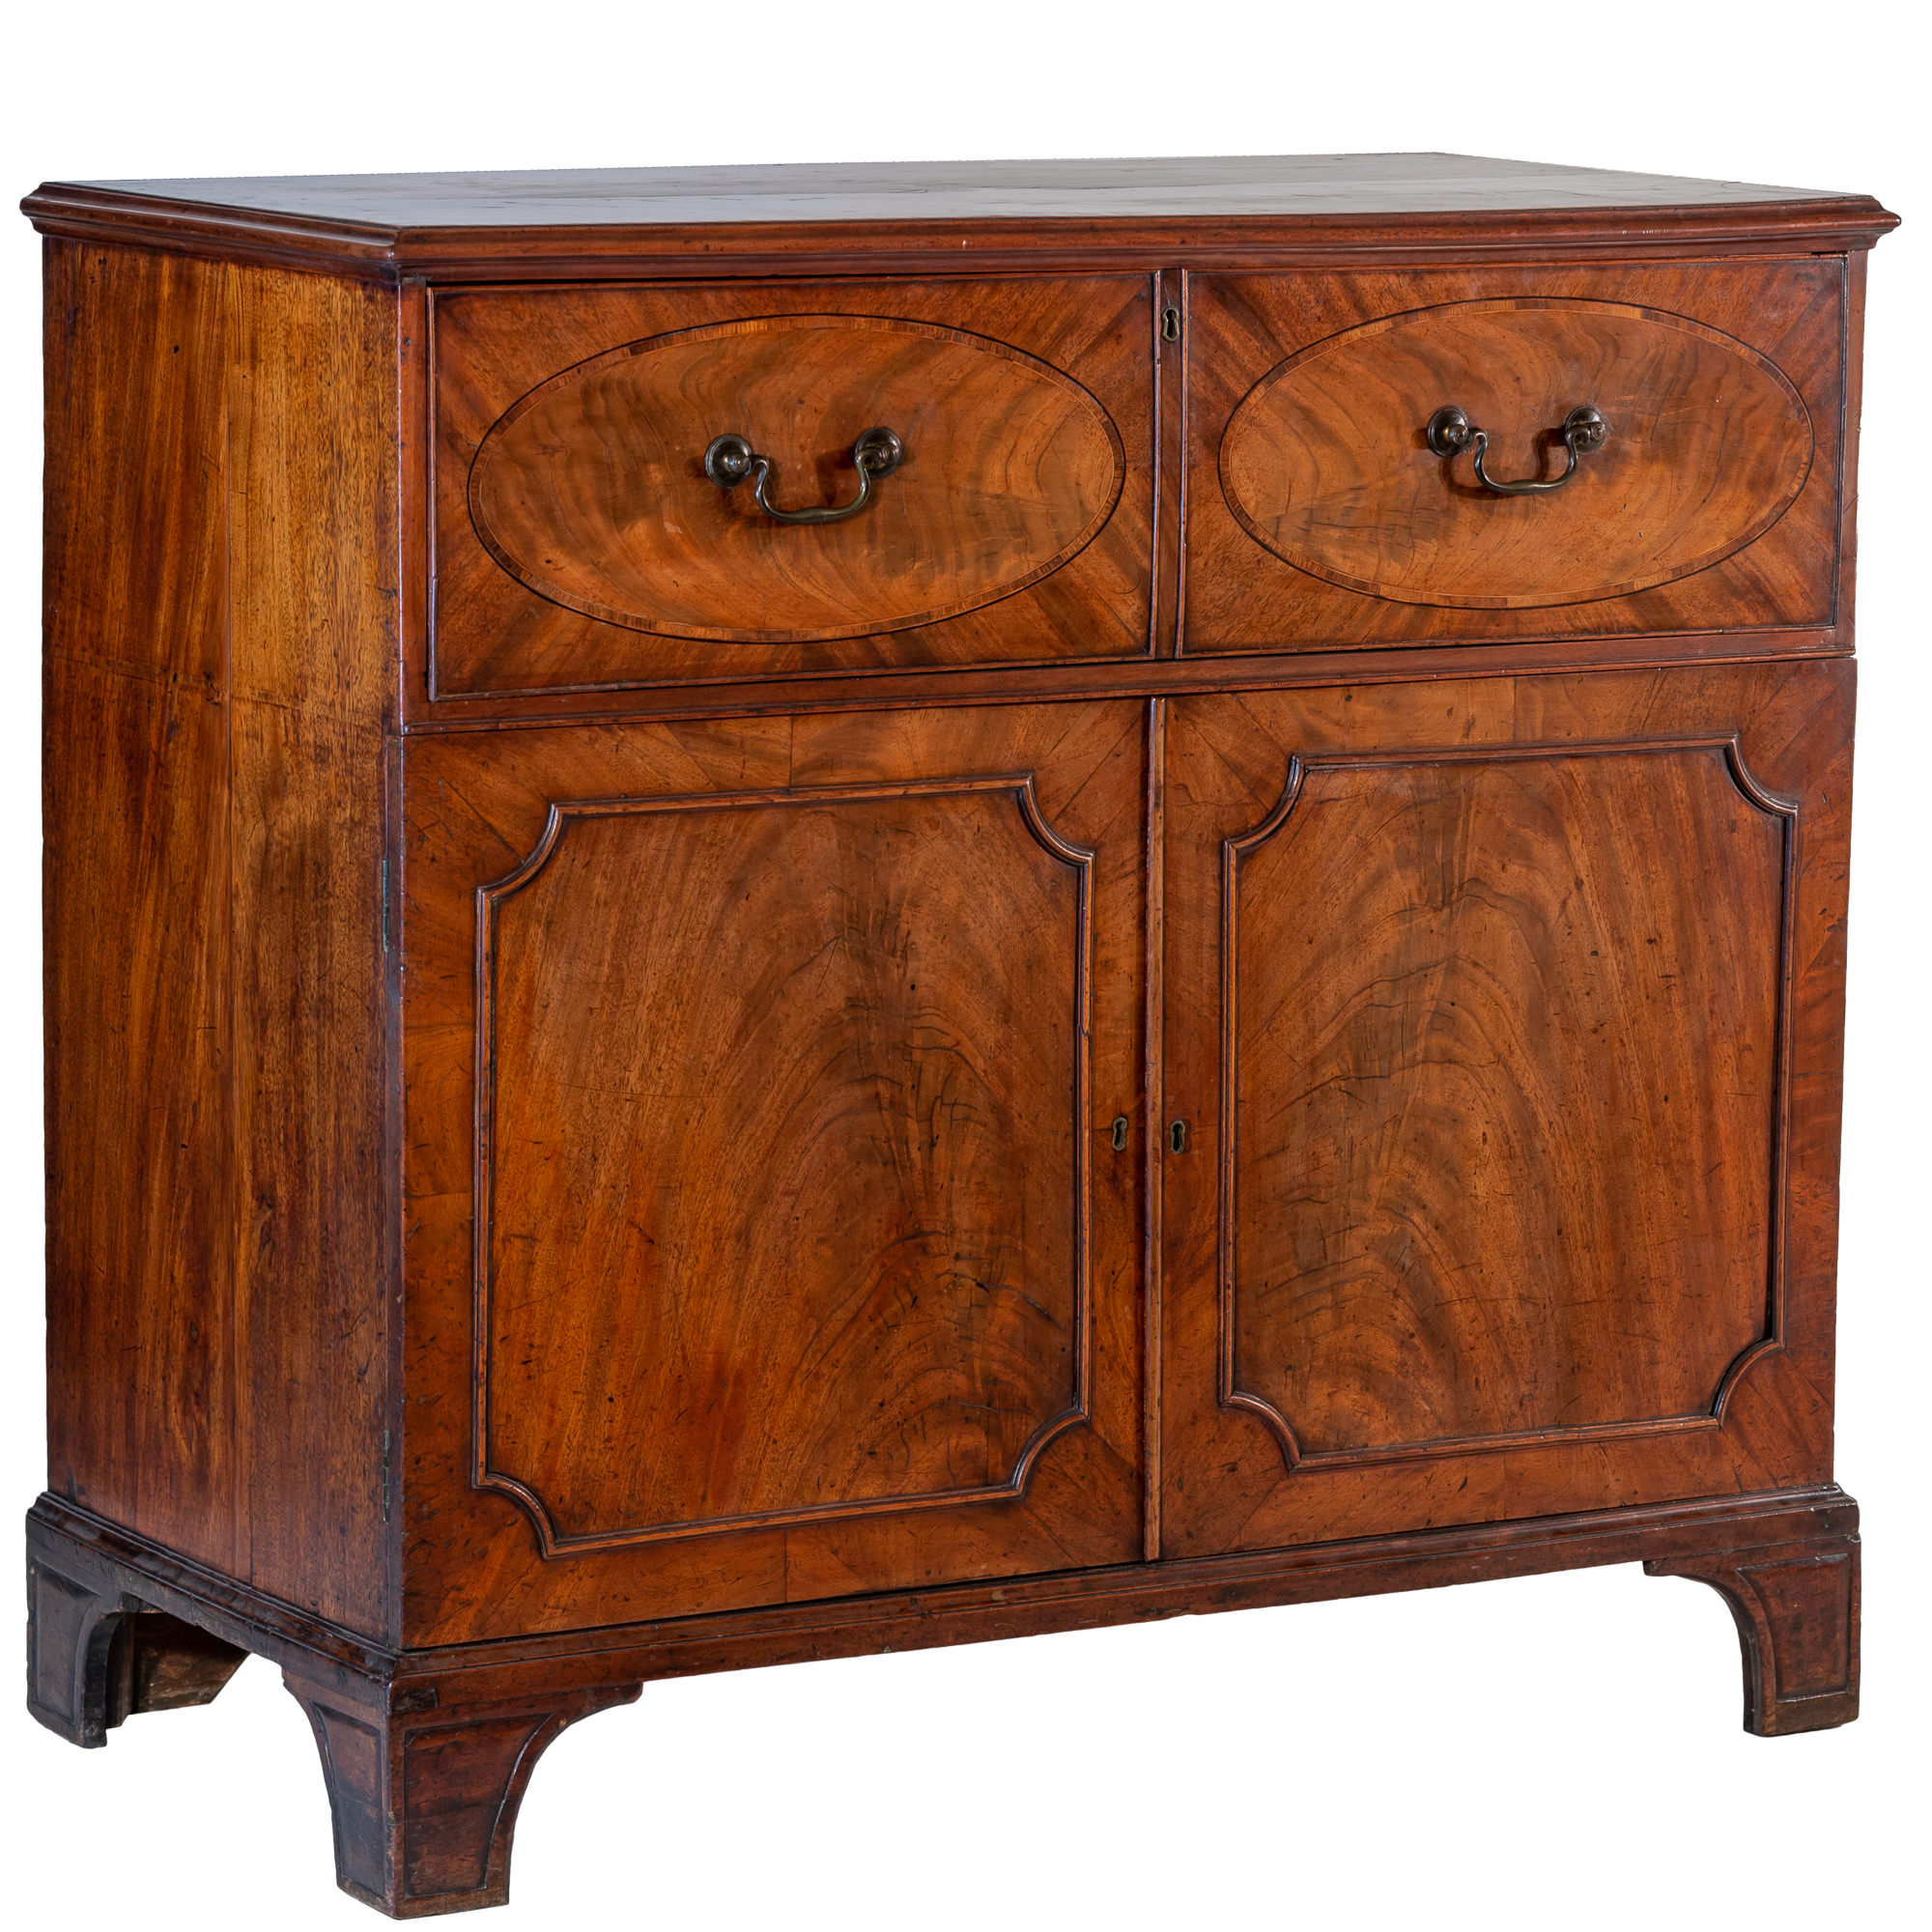 'George III Mahogany Secretaire the Fitted Interior with Chequered String Inlay Circa 1800'